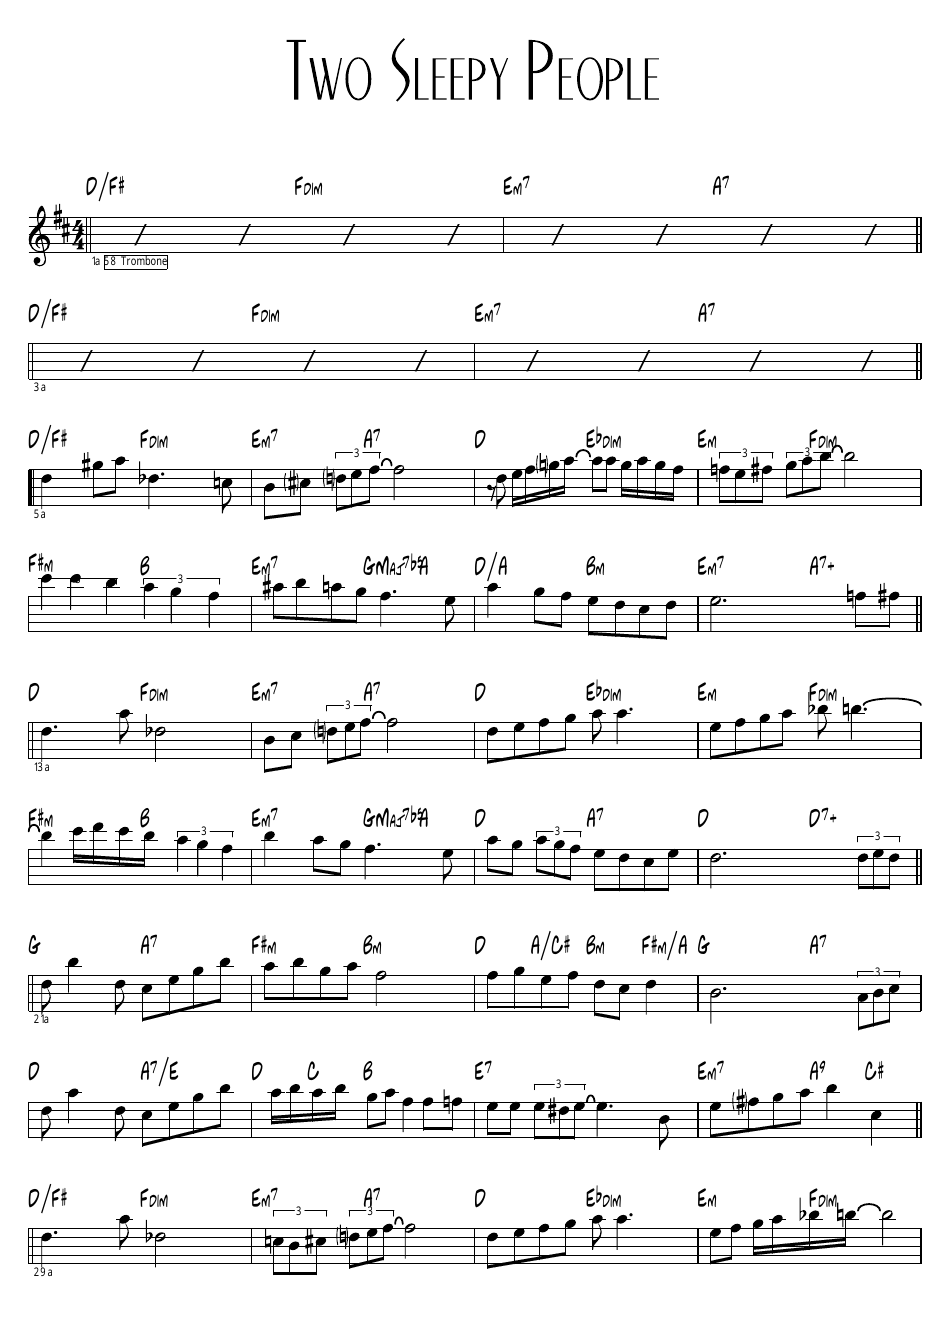 Two Sleepy People sheet music and chords image preview